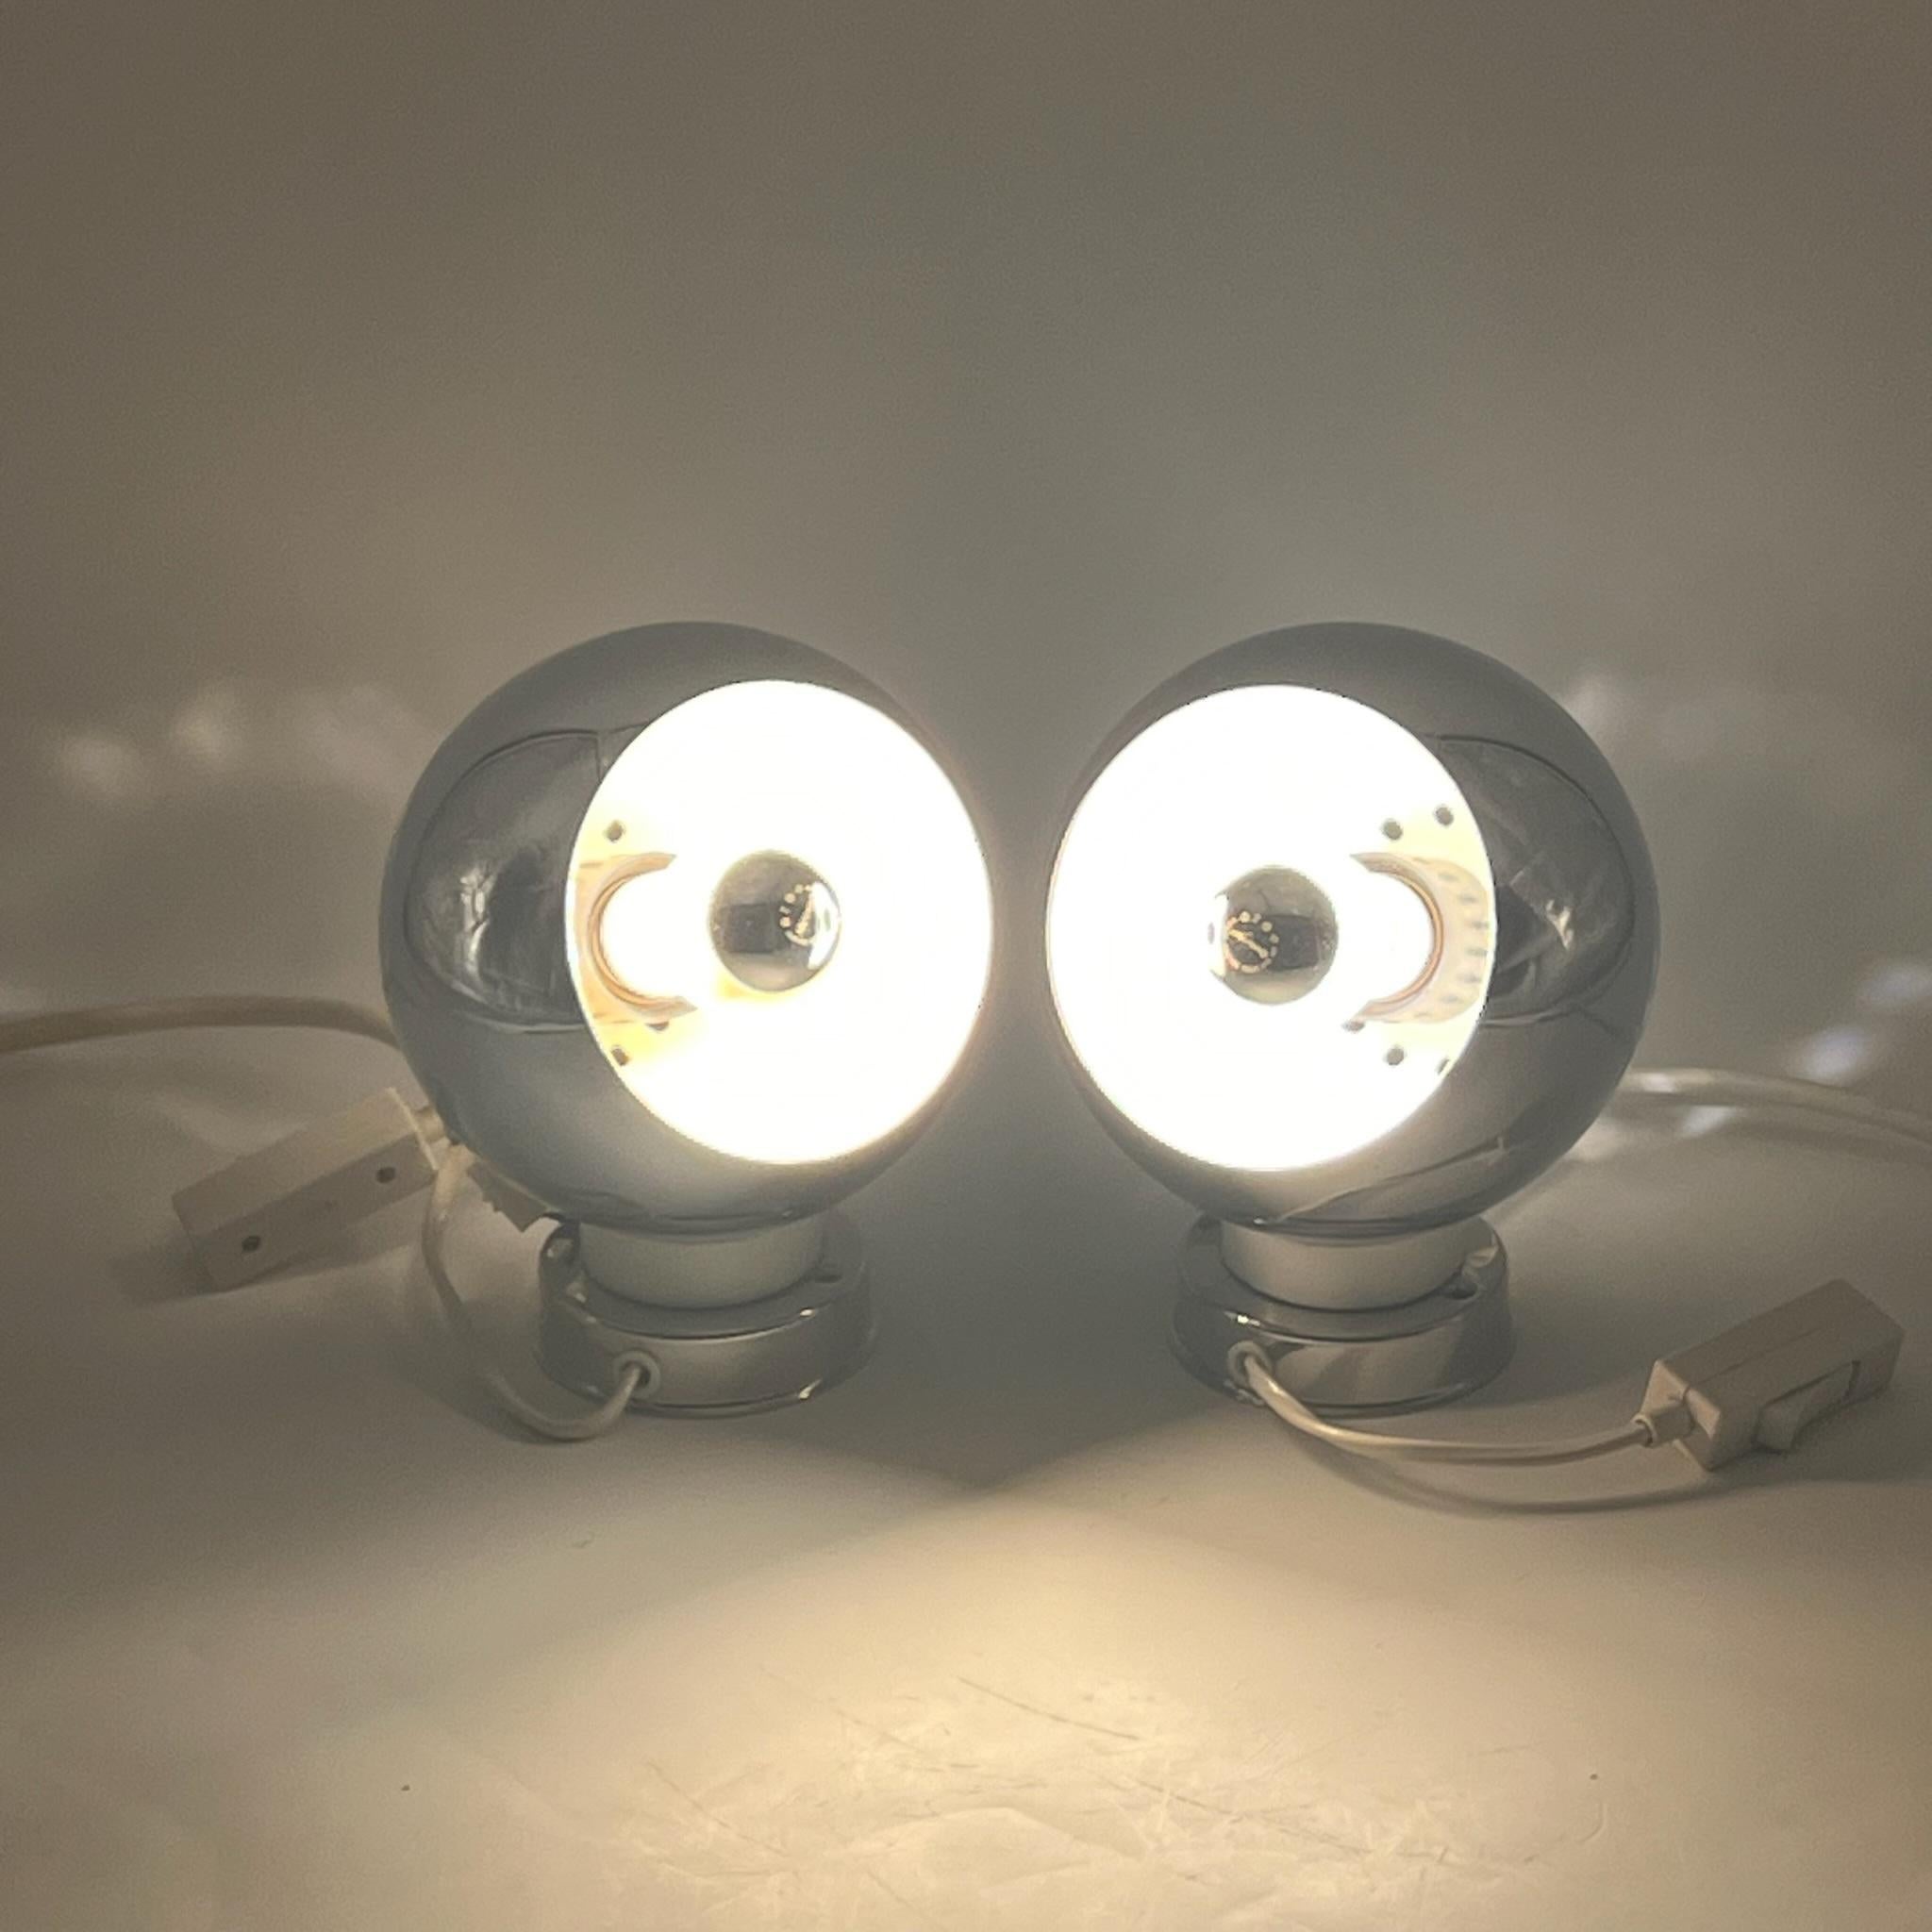 Immerse yourself in the timeless elegance of 1960s Italian design with this incredible pair of iconic eyeball lamps crafted by Goffredo Reggiani. Made in Italy with meticulous attention to detail, these lamps showcase the iconic Reggiani style that